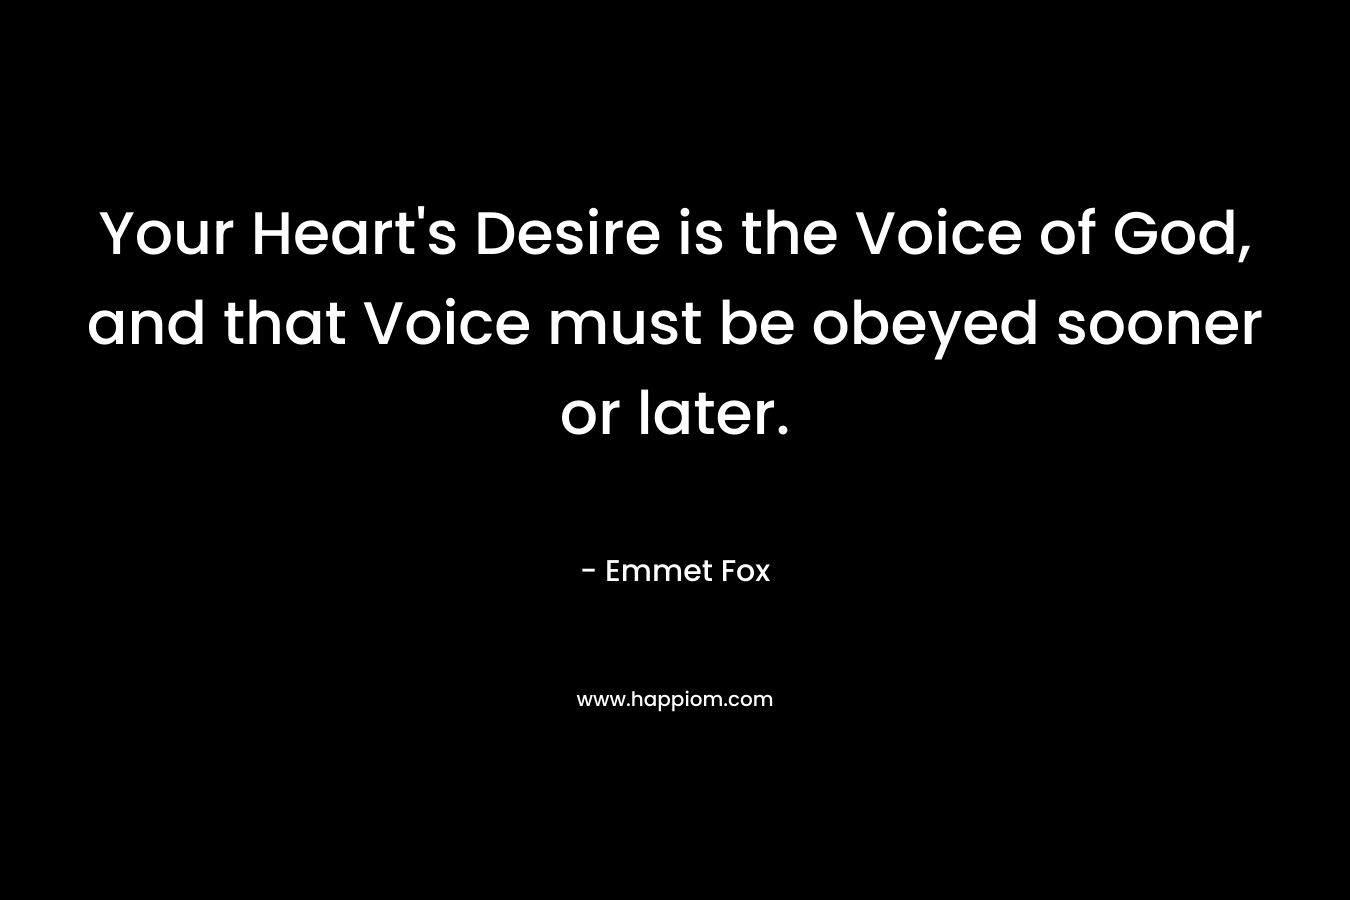 Your Heart's Desire is the Voice of God, and that Voice must be obeyed sooner or later.